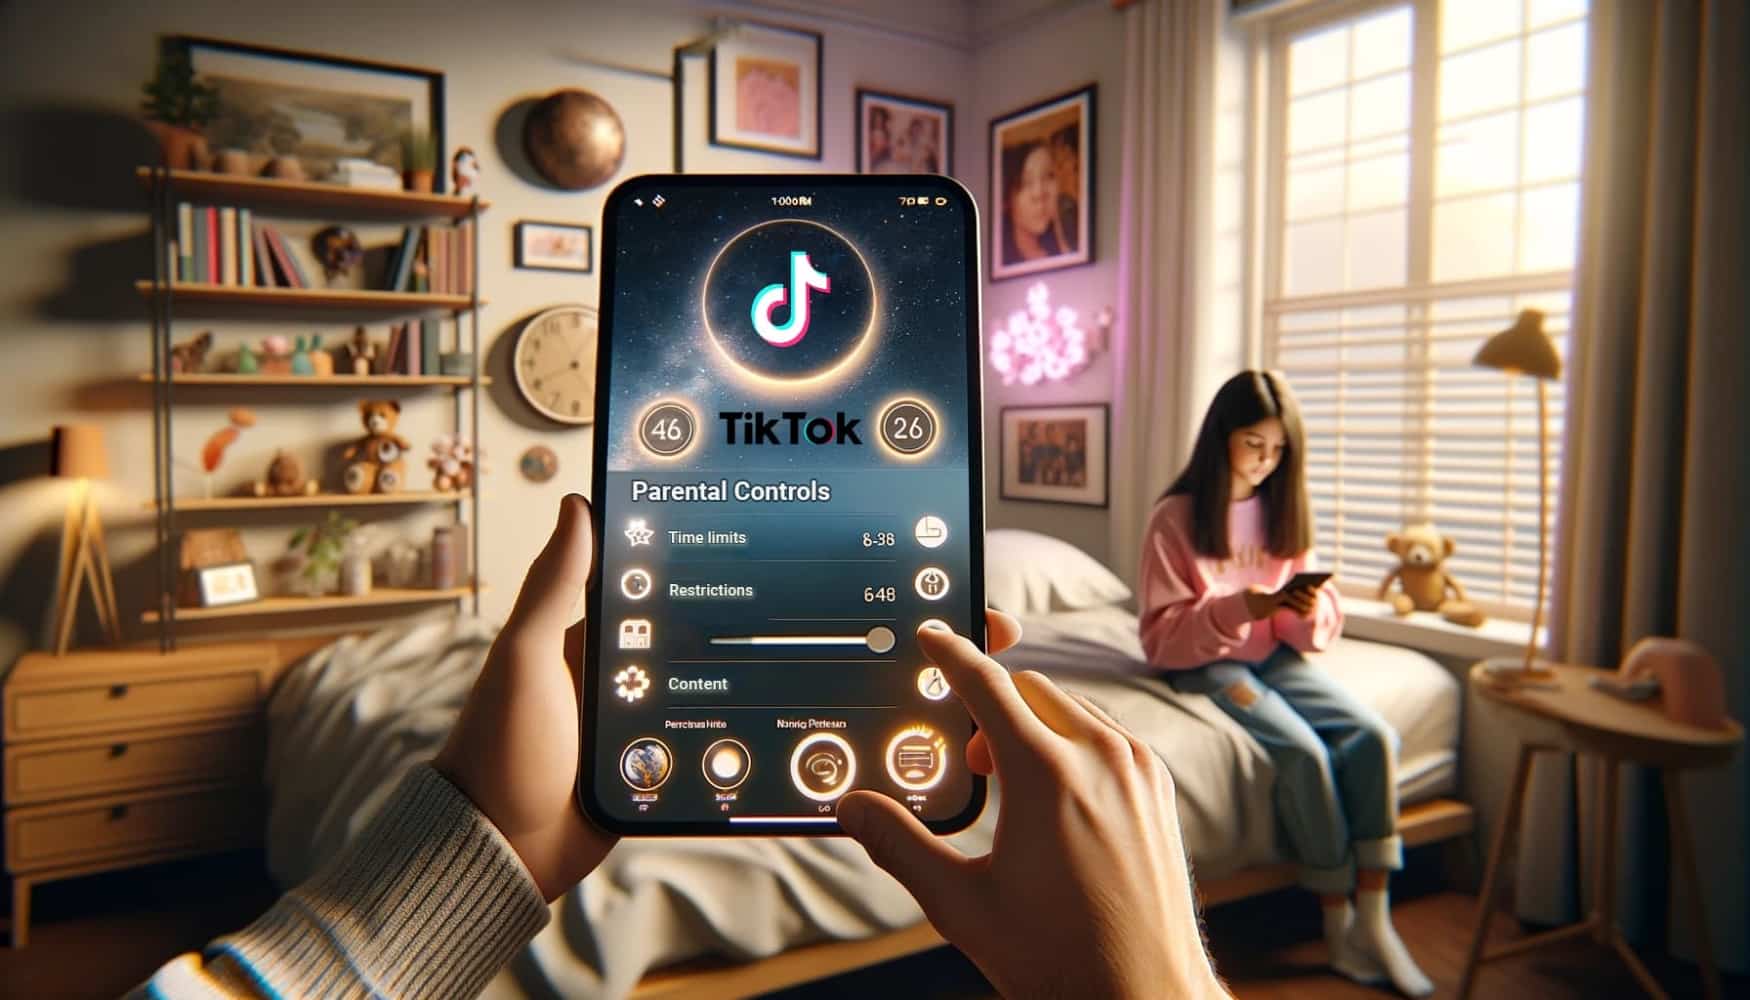 The man's hands are holding a phone, which is openly displaying information about the use of TikTok by the child of the girl, who is sitting in the background of the photo on a bed and looking at her phone